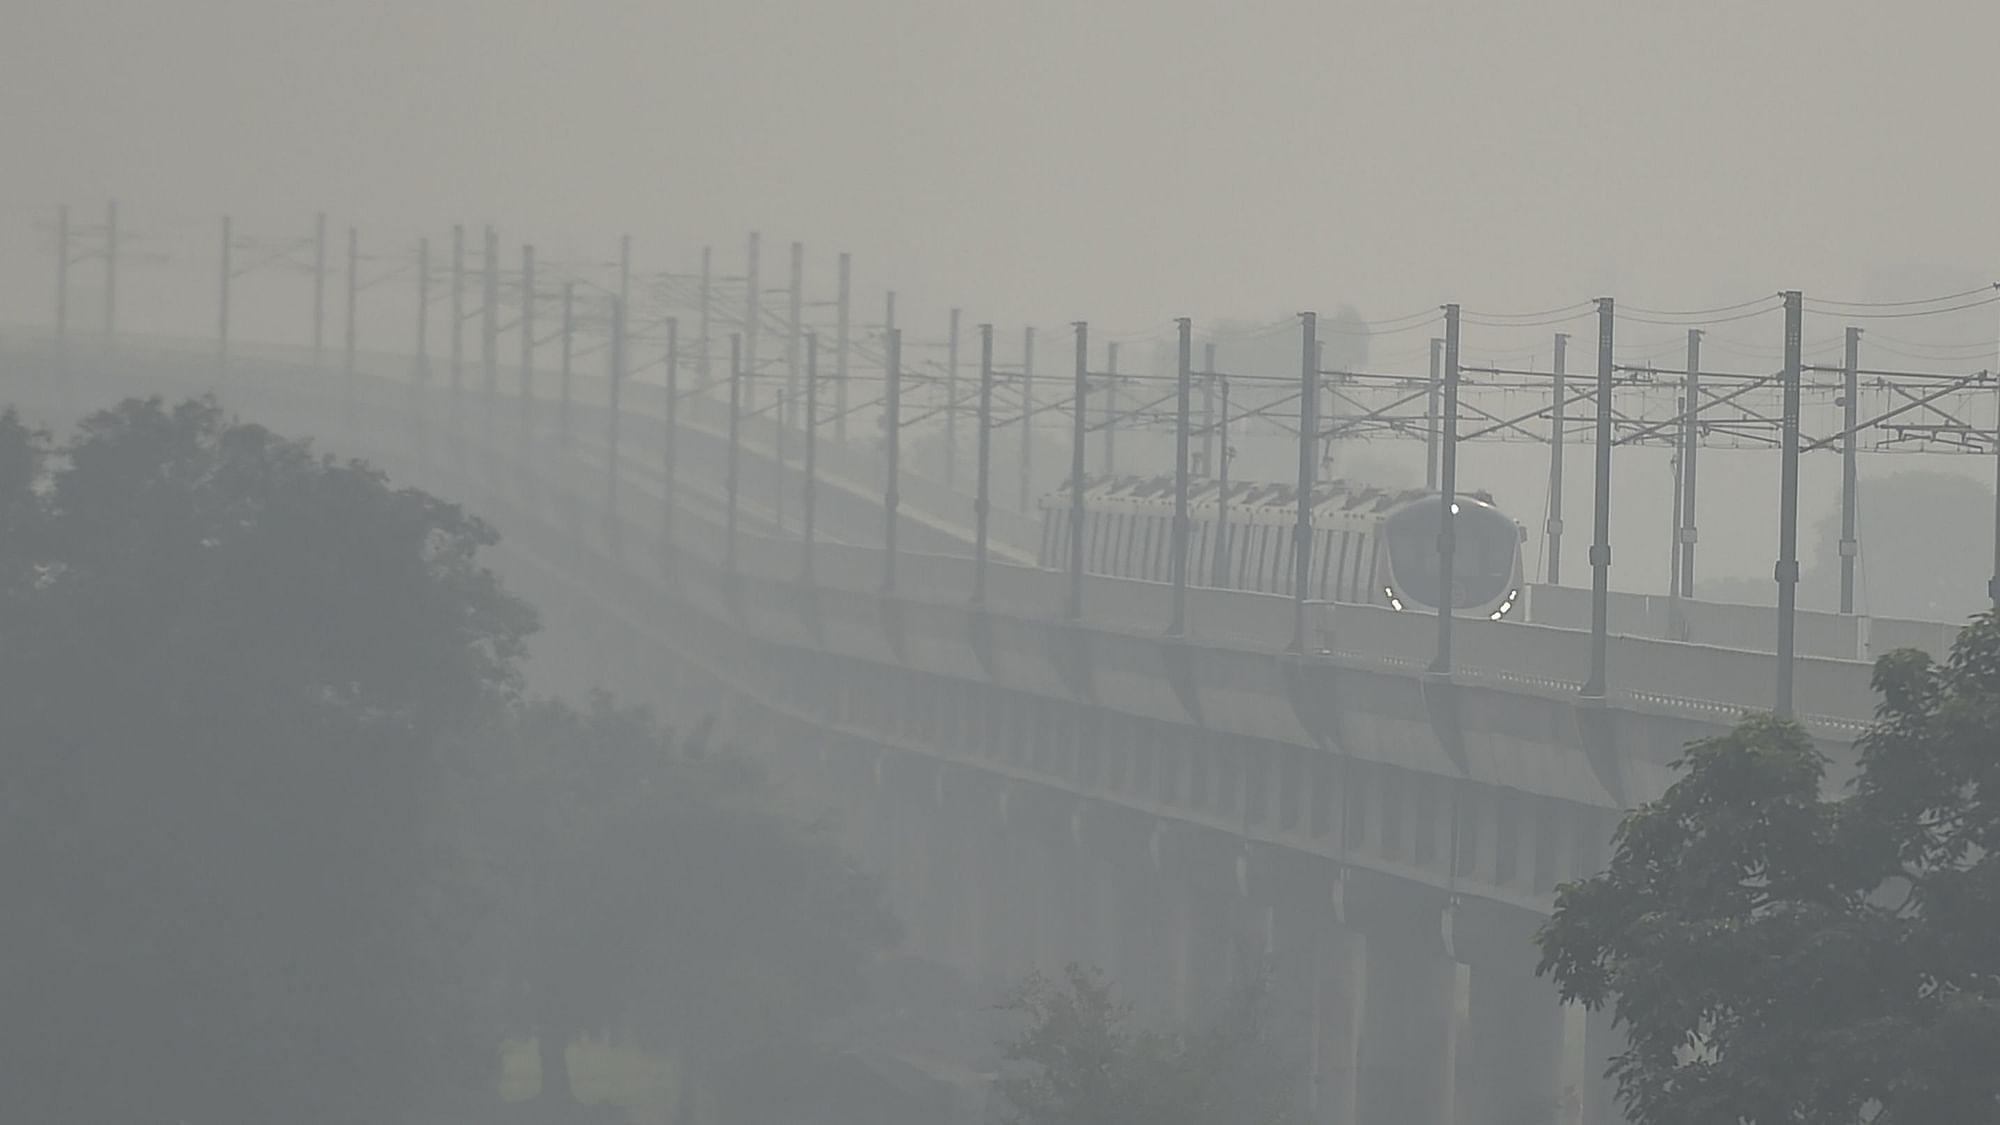  A metro train runs on a track in hazy weather, in New Delhi, Wednesday, 14 October, 2020. Image used for representation only.